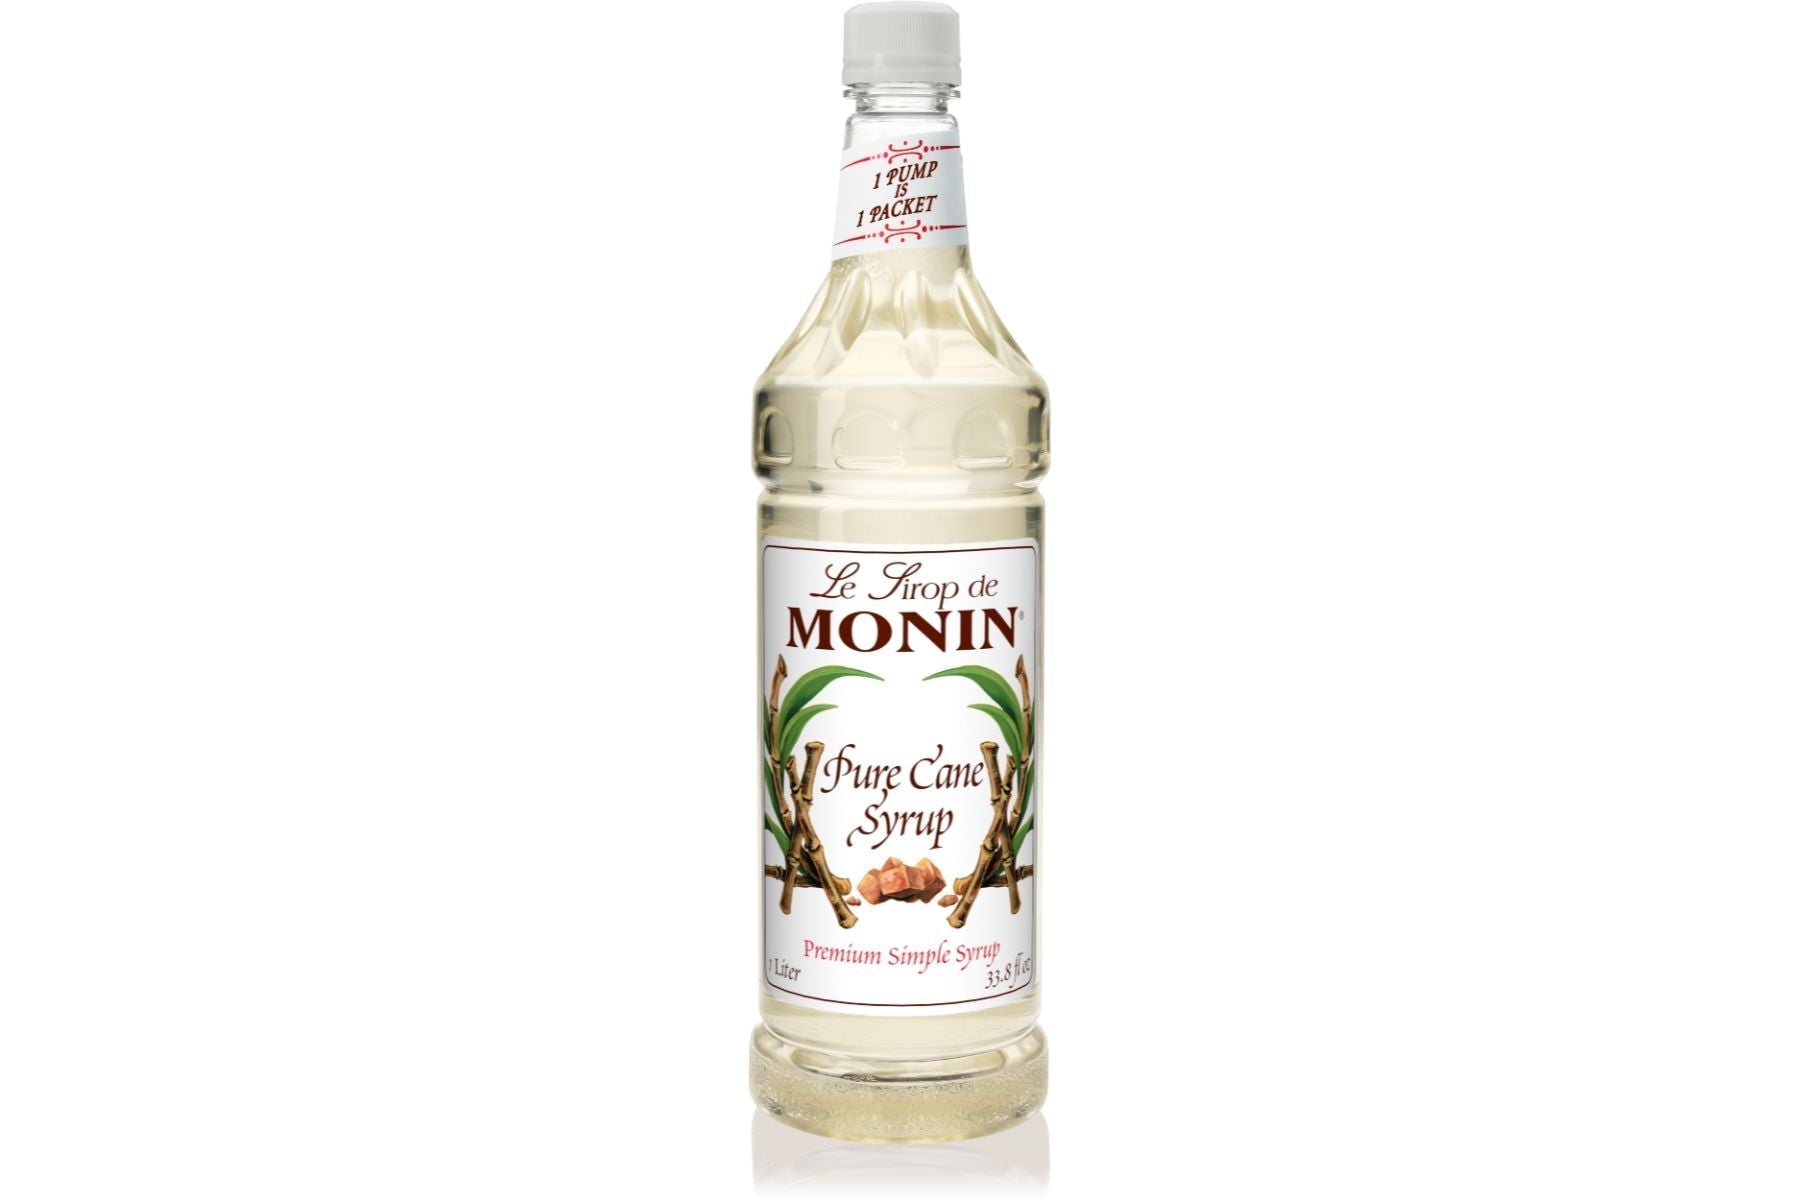 Monin Classic Syrup - 1L Plastic Bottle: Pure Cane Syrup